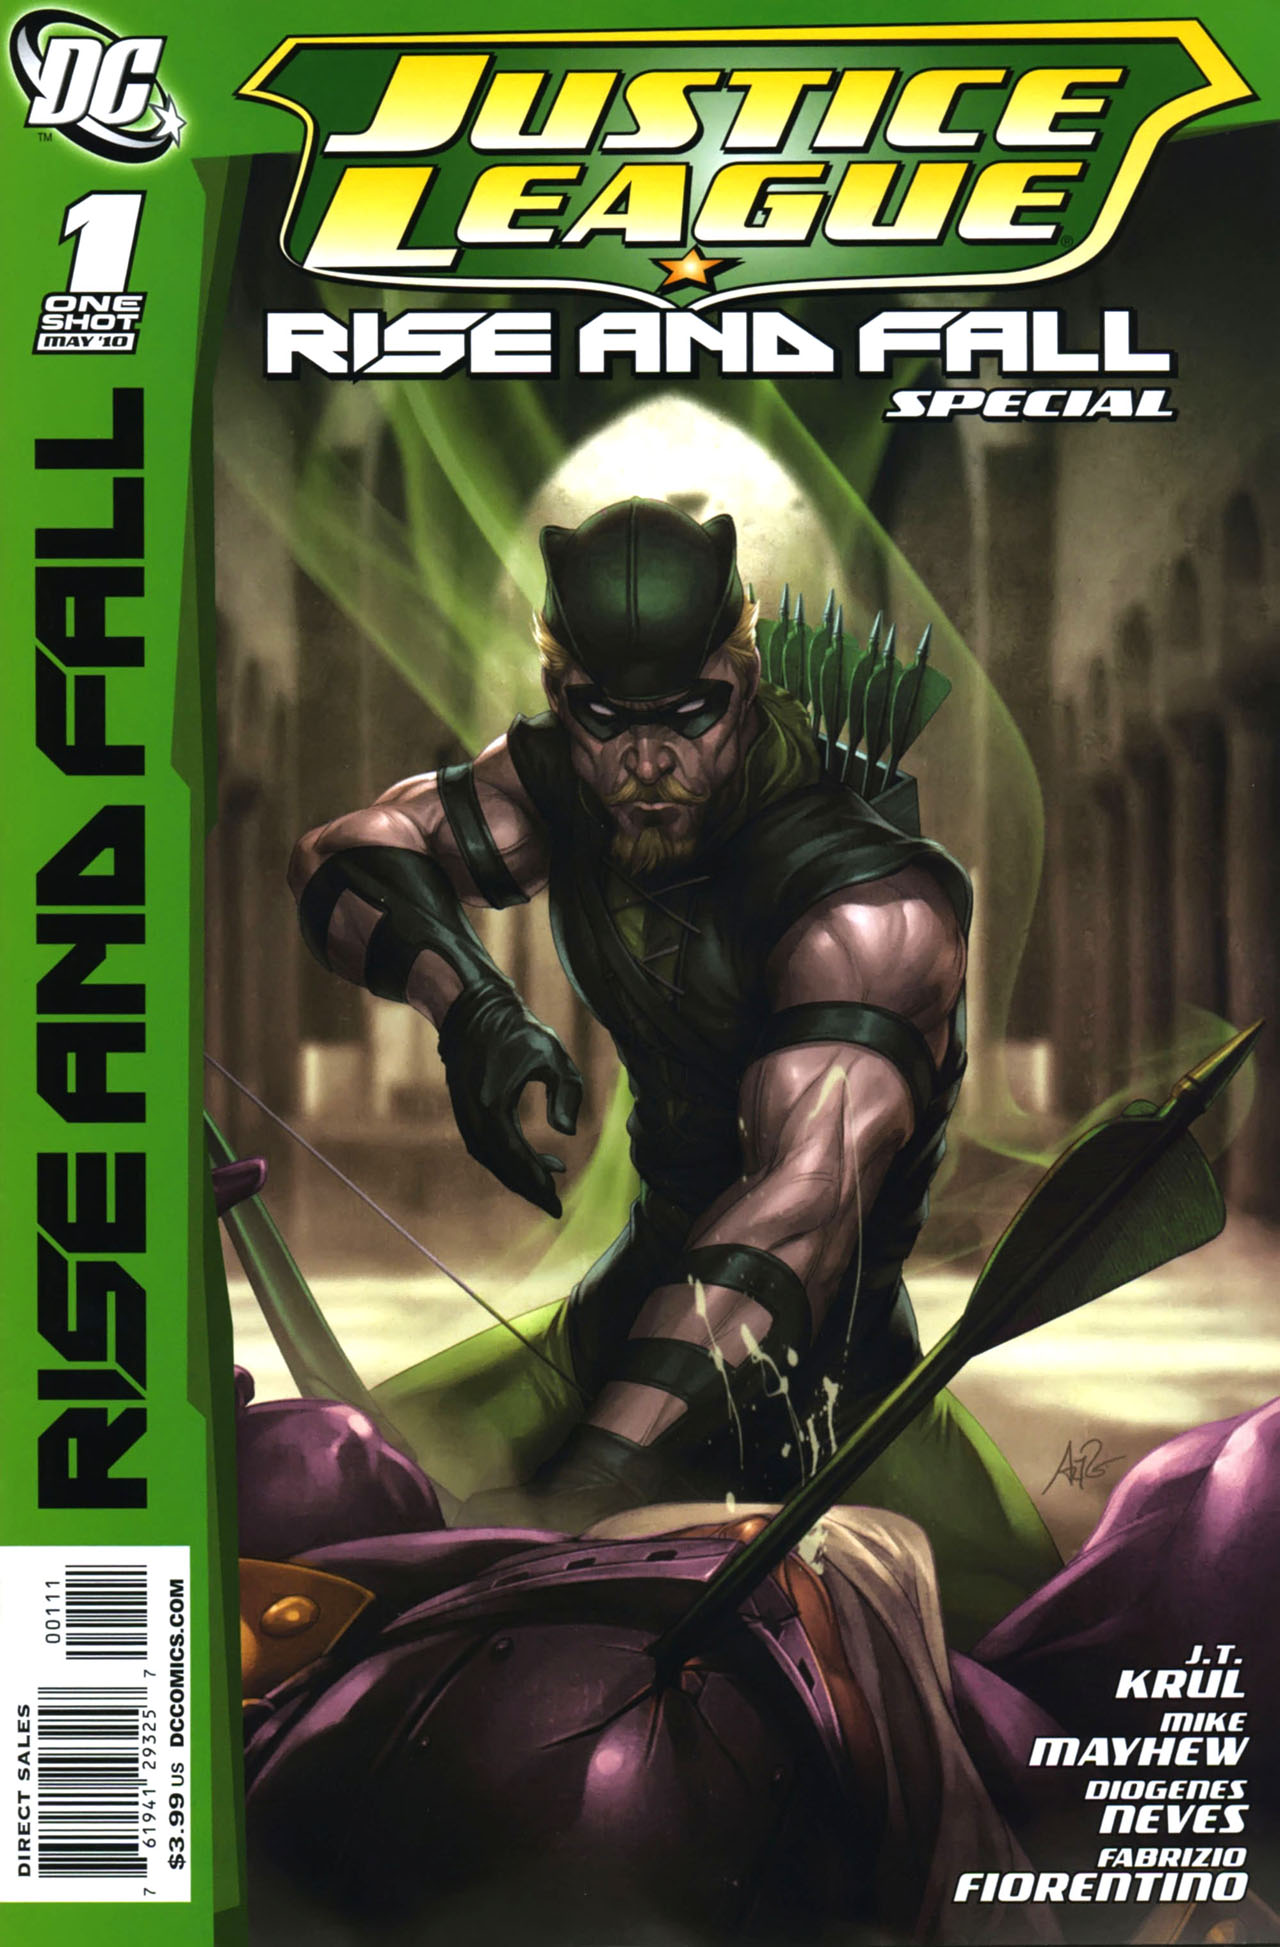 Read online Justice League: The Rise & Fall Special comic -  Issue # Full - 1